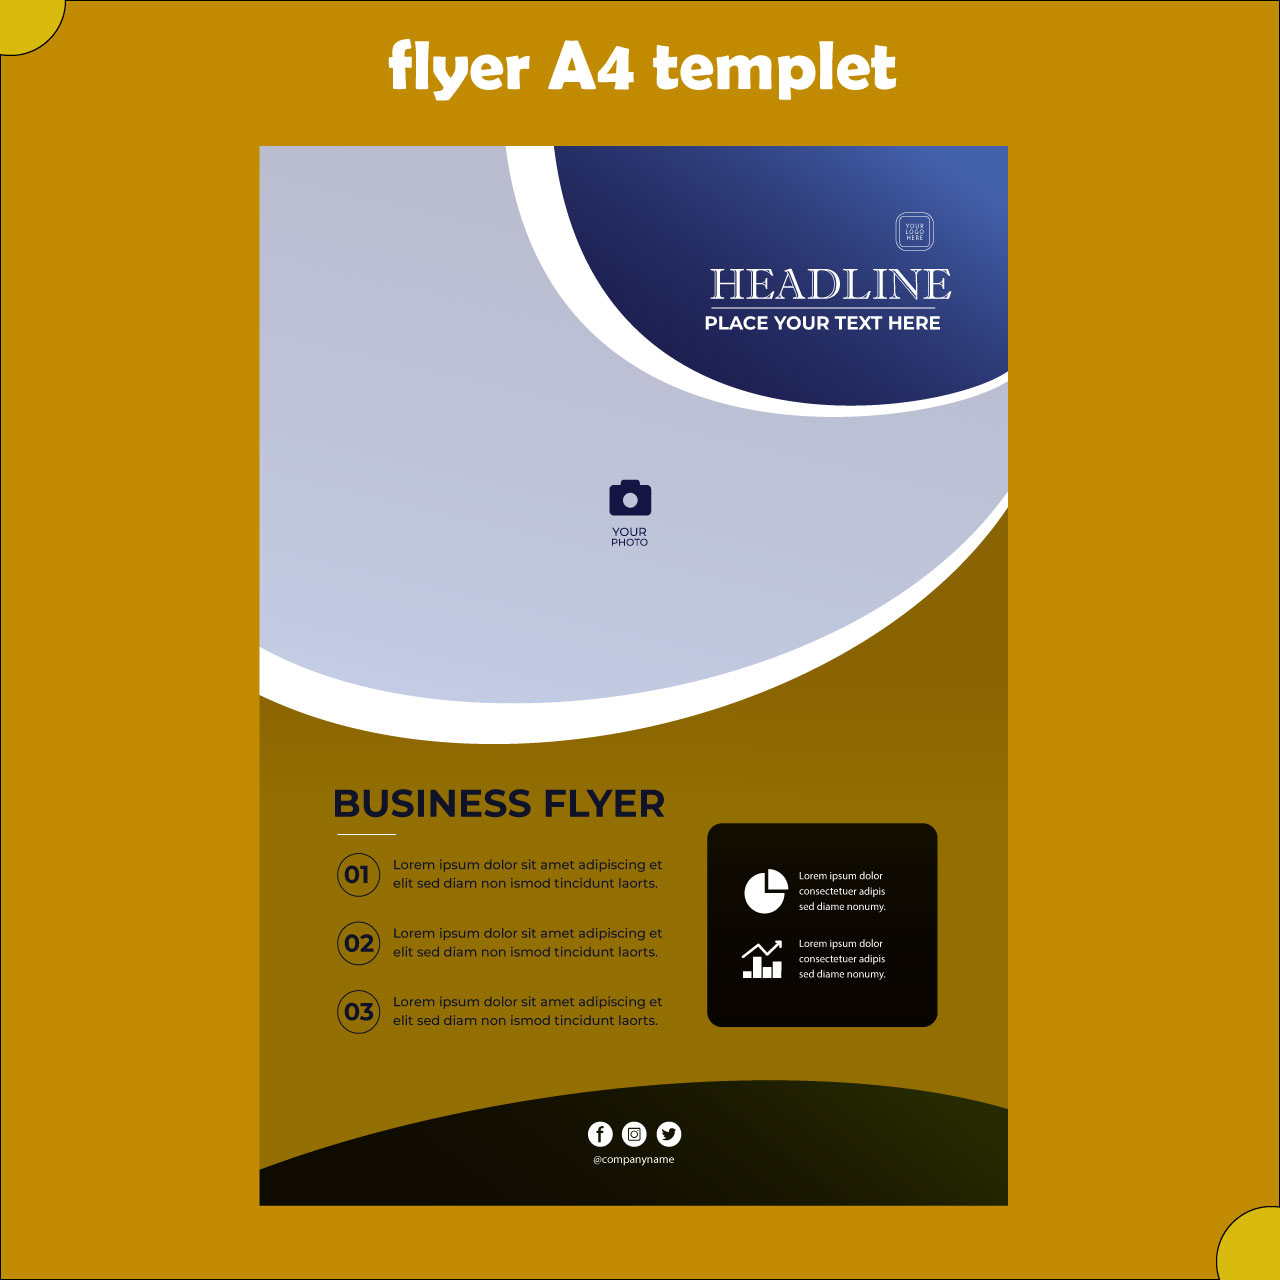 Flyer A4 Template created by pavan gr.